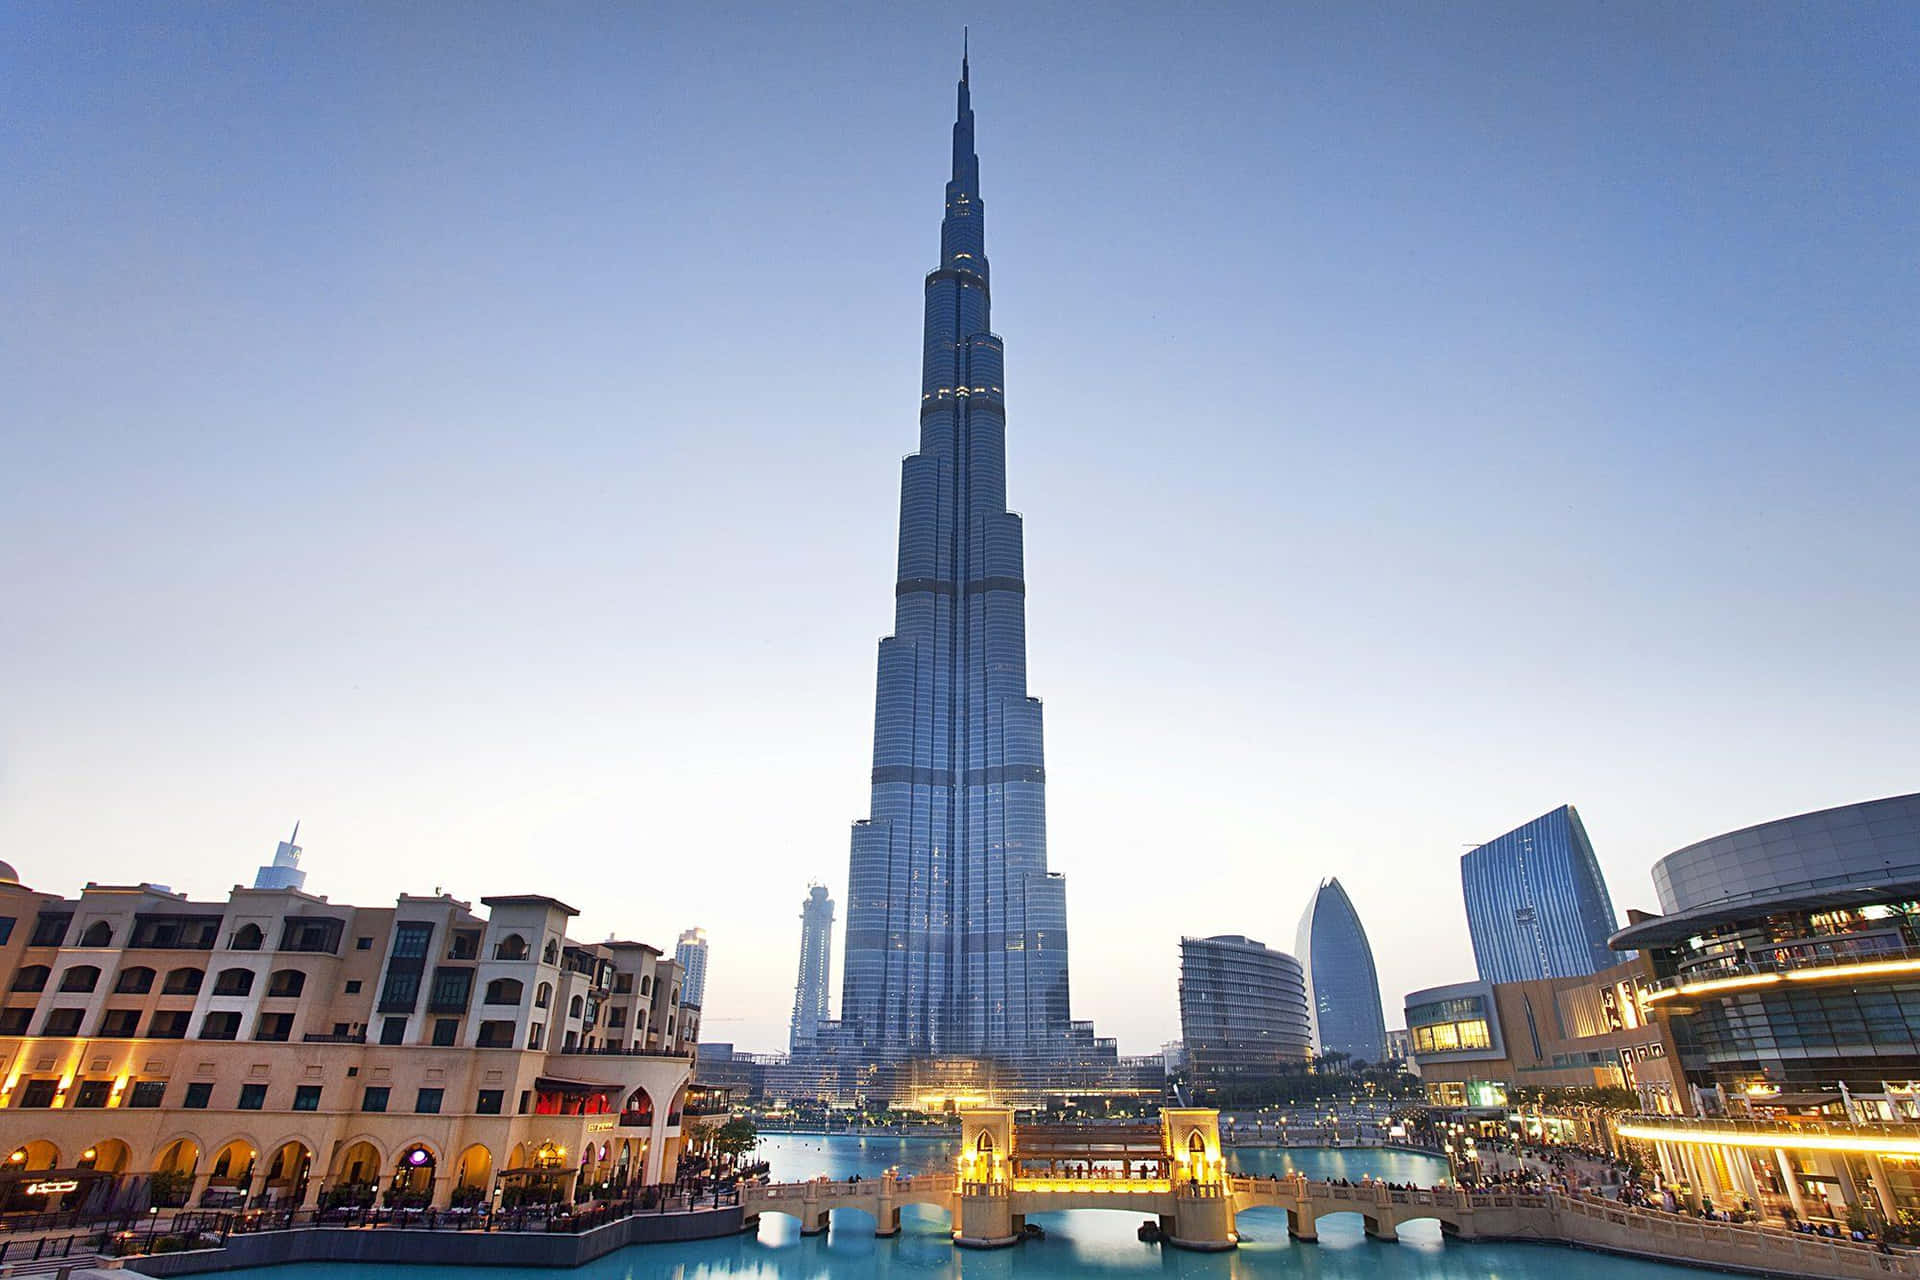 The Burj Khalifa Tower Is Seen From The Water